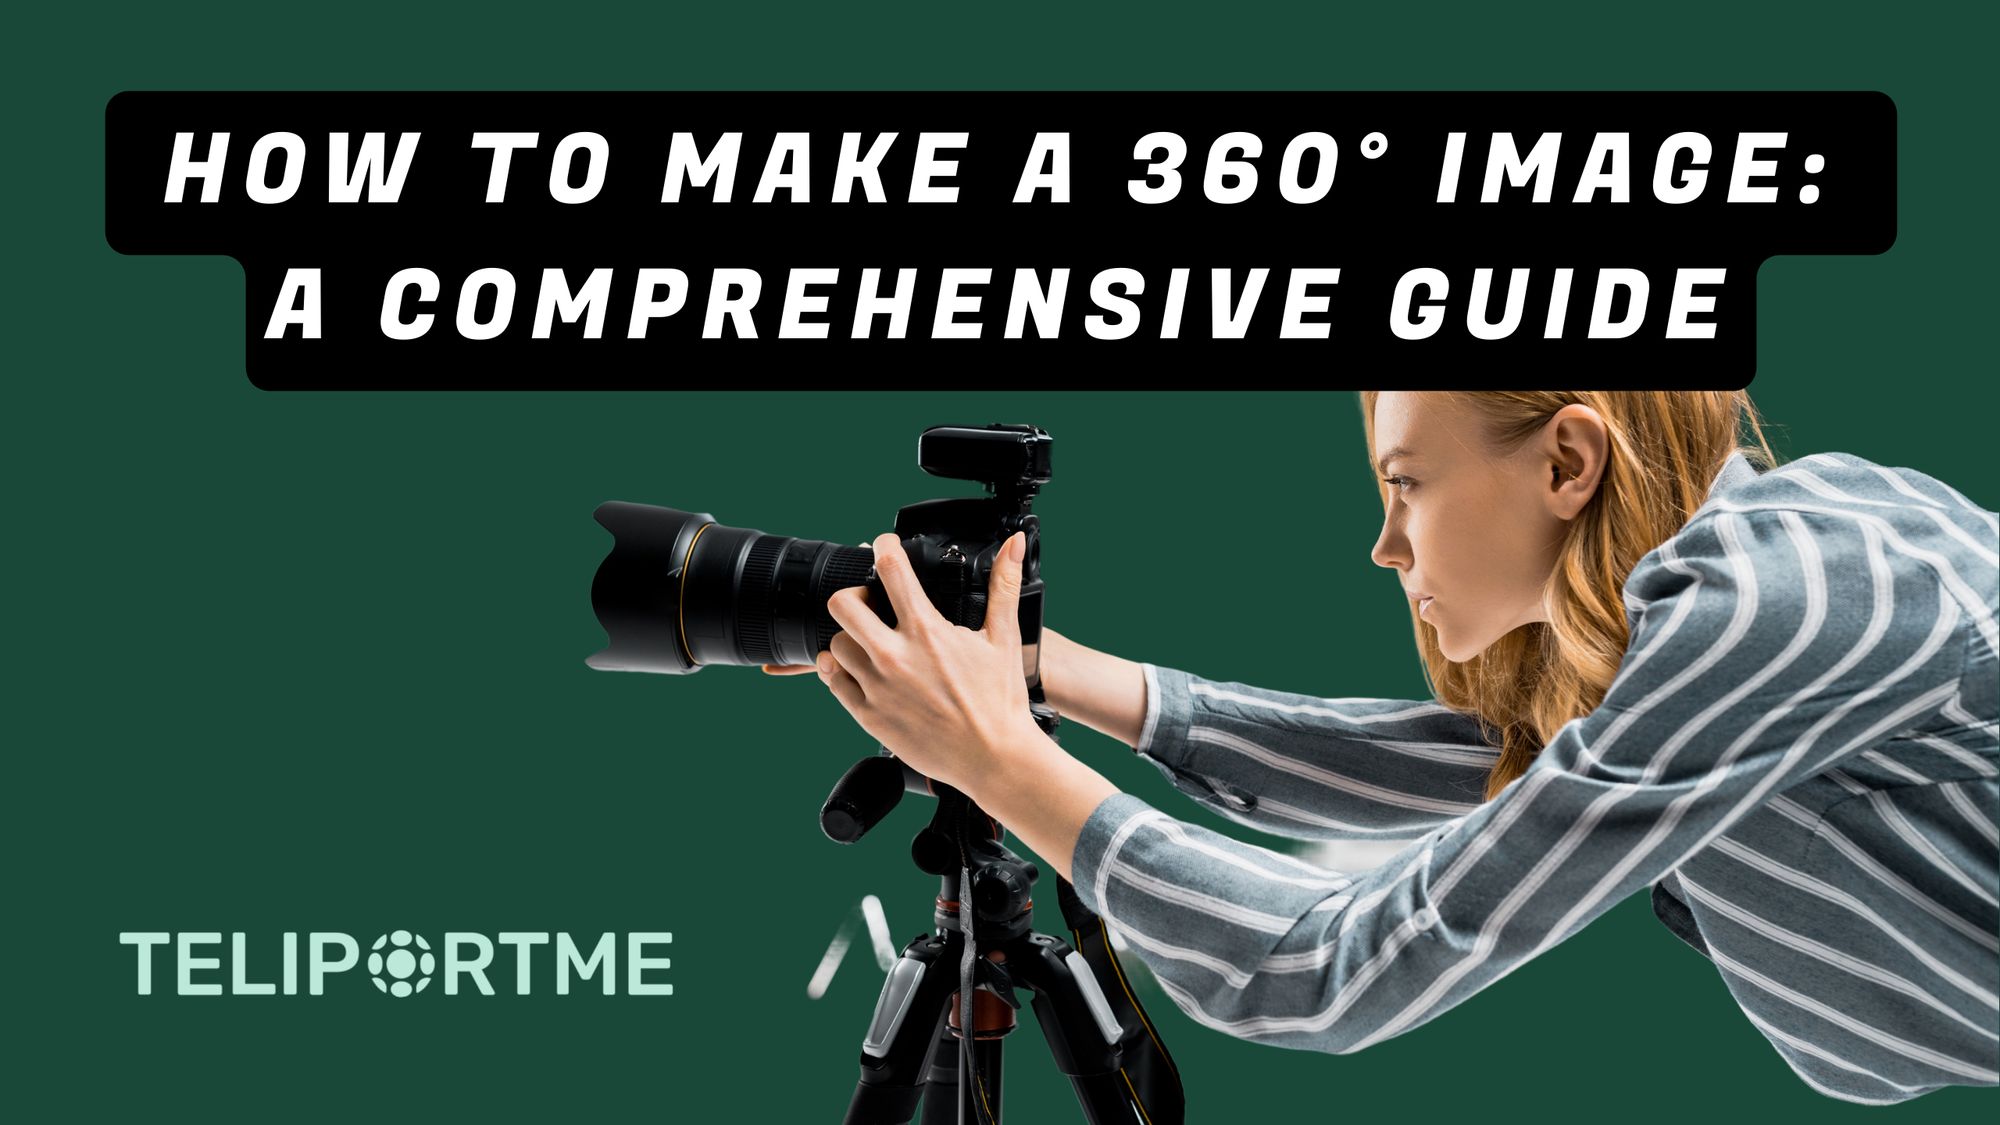 How to Make a 360° Image: A Comprehensive Guide